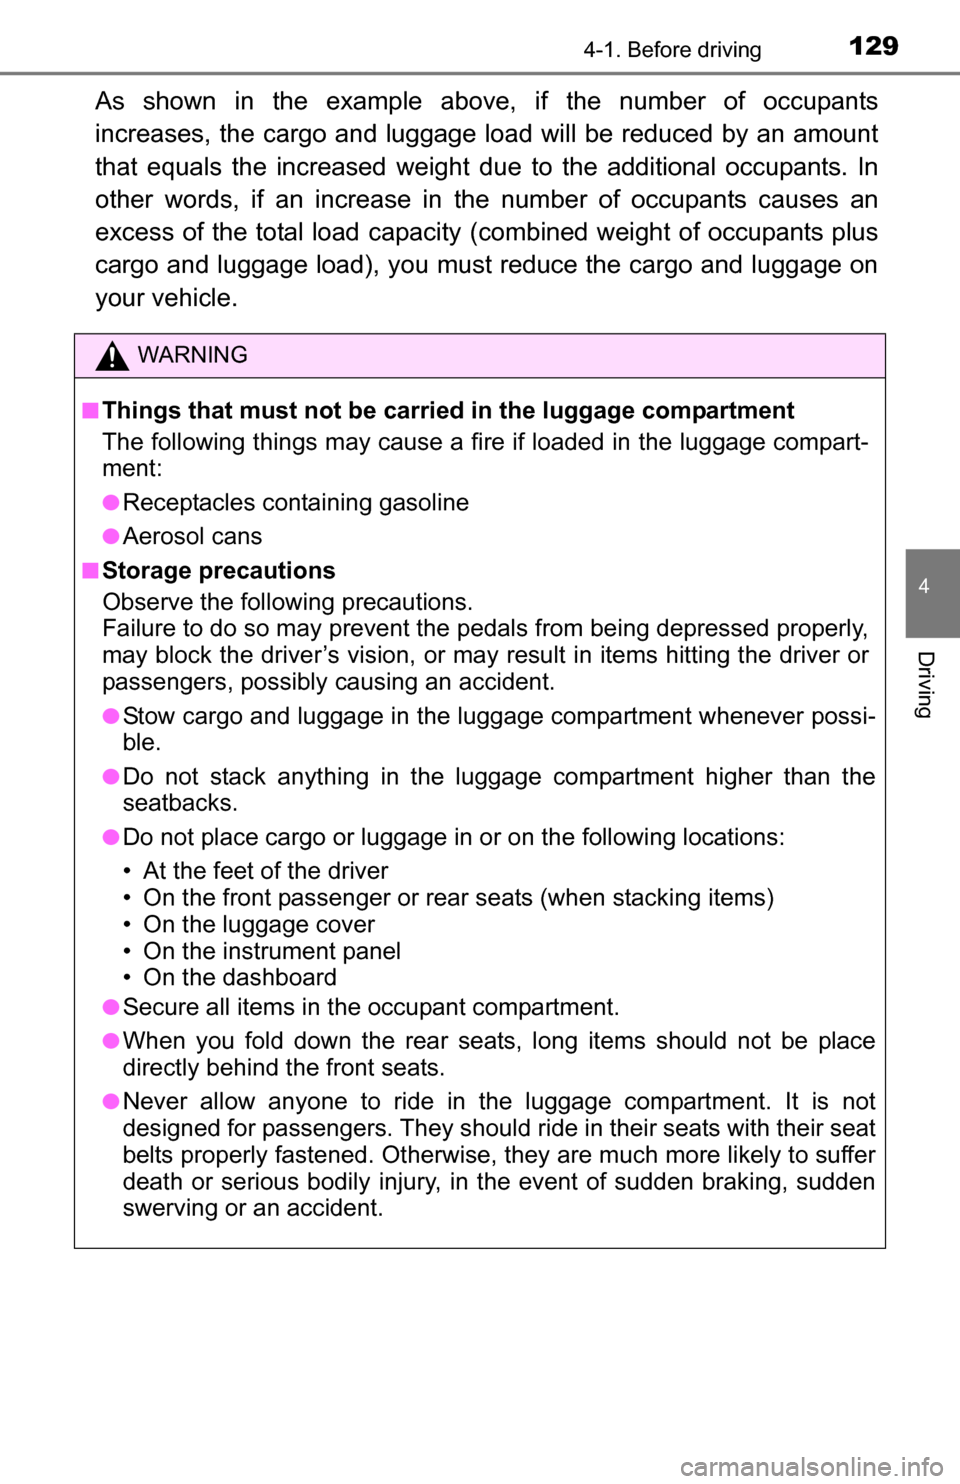 TOYOTA YARIS 2016 3.G Owners Manual 1294-1. Before driving
4
Driving
As shown in the example above, if the number of occupants
increases, the cargo and luggage load will be reduced by an amount
that equals the increased weight du e to t